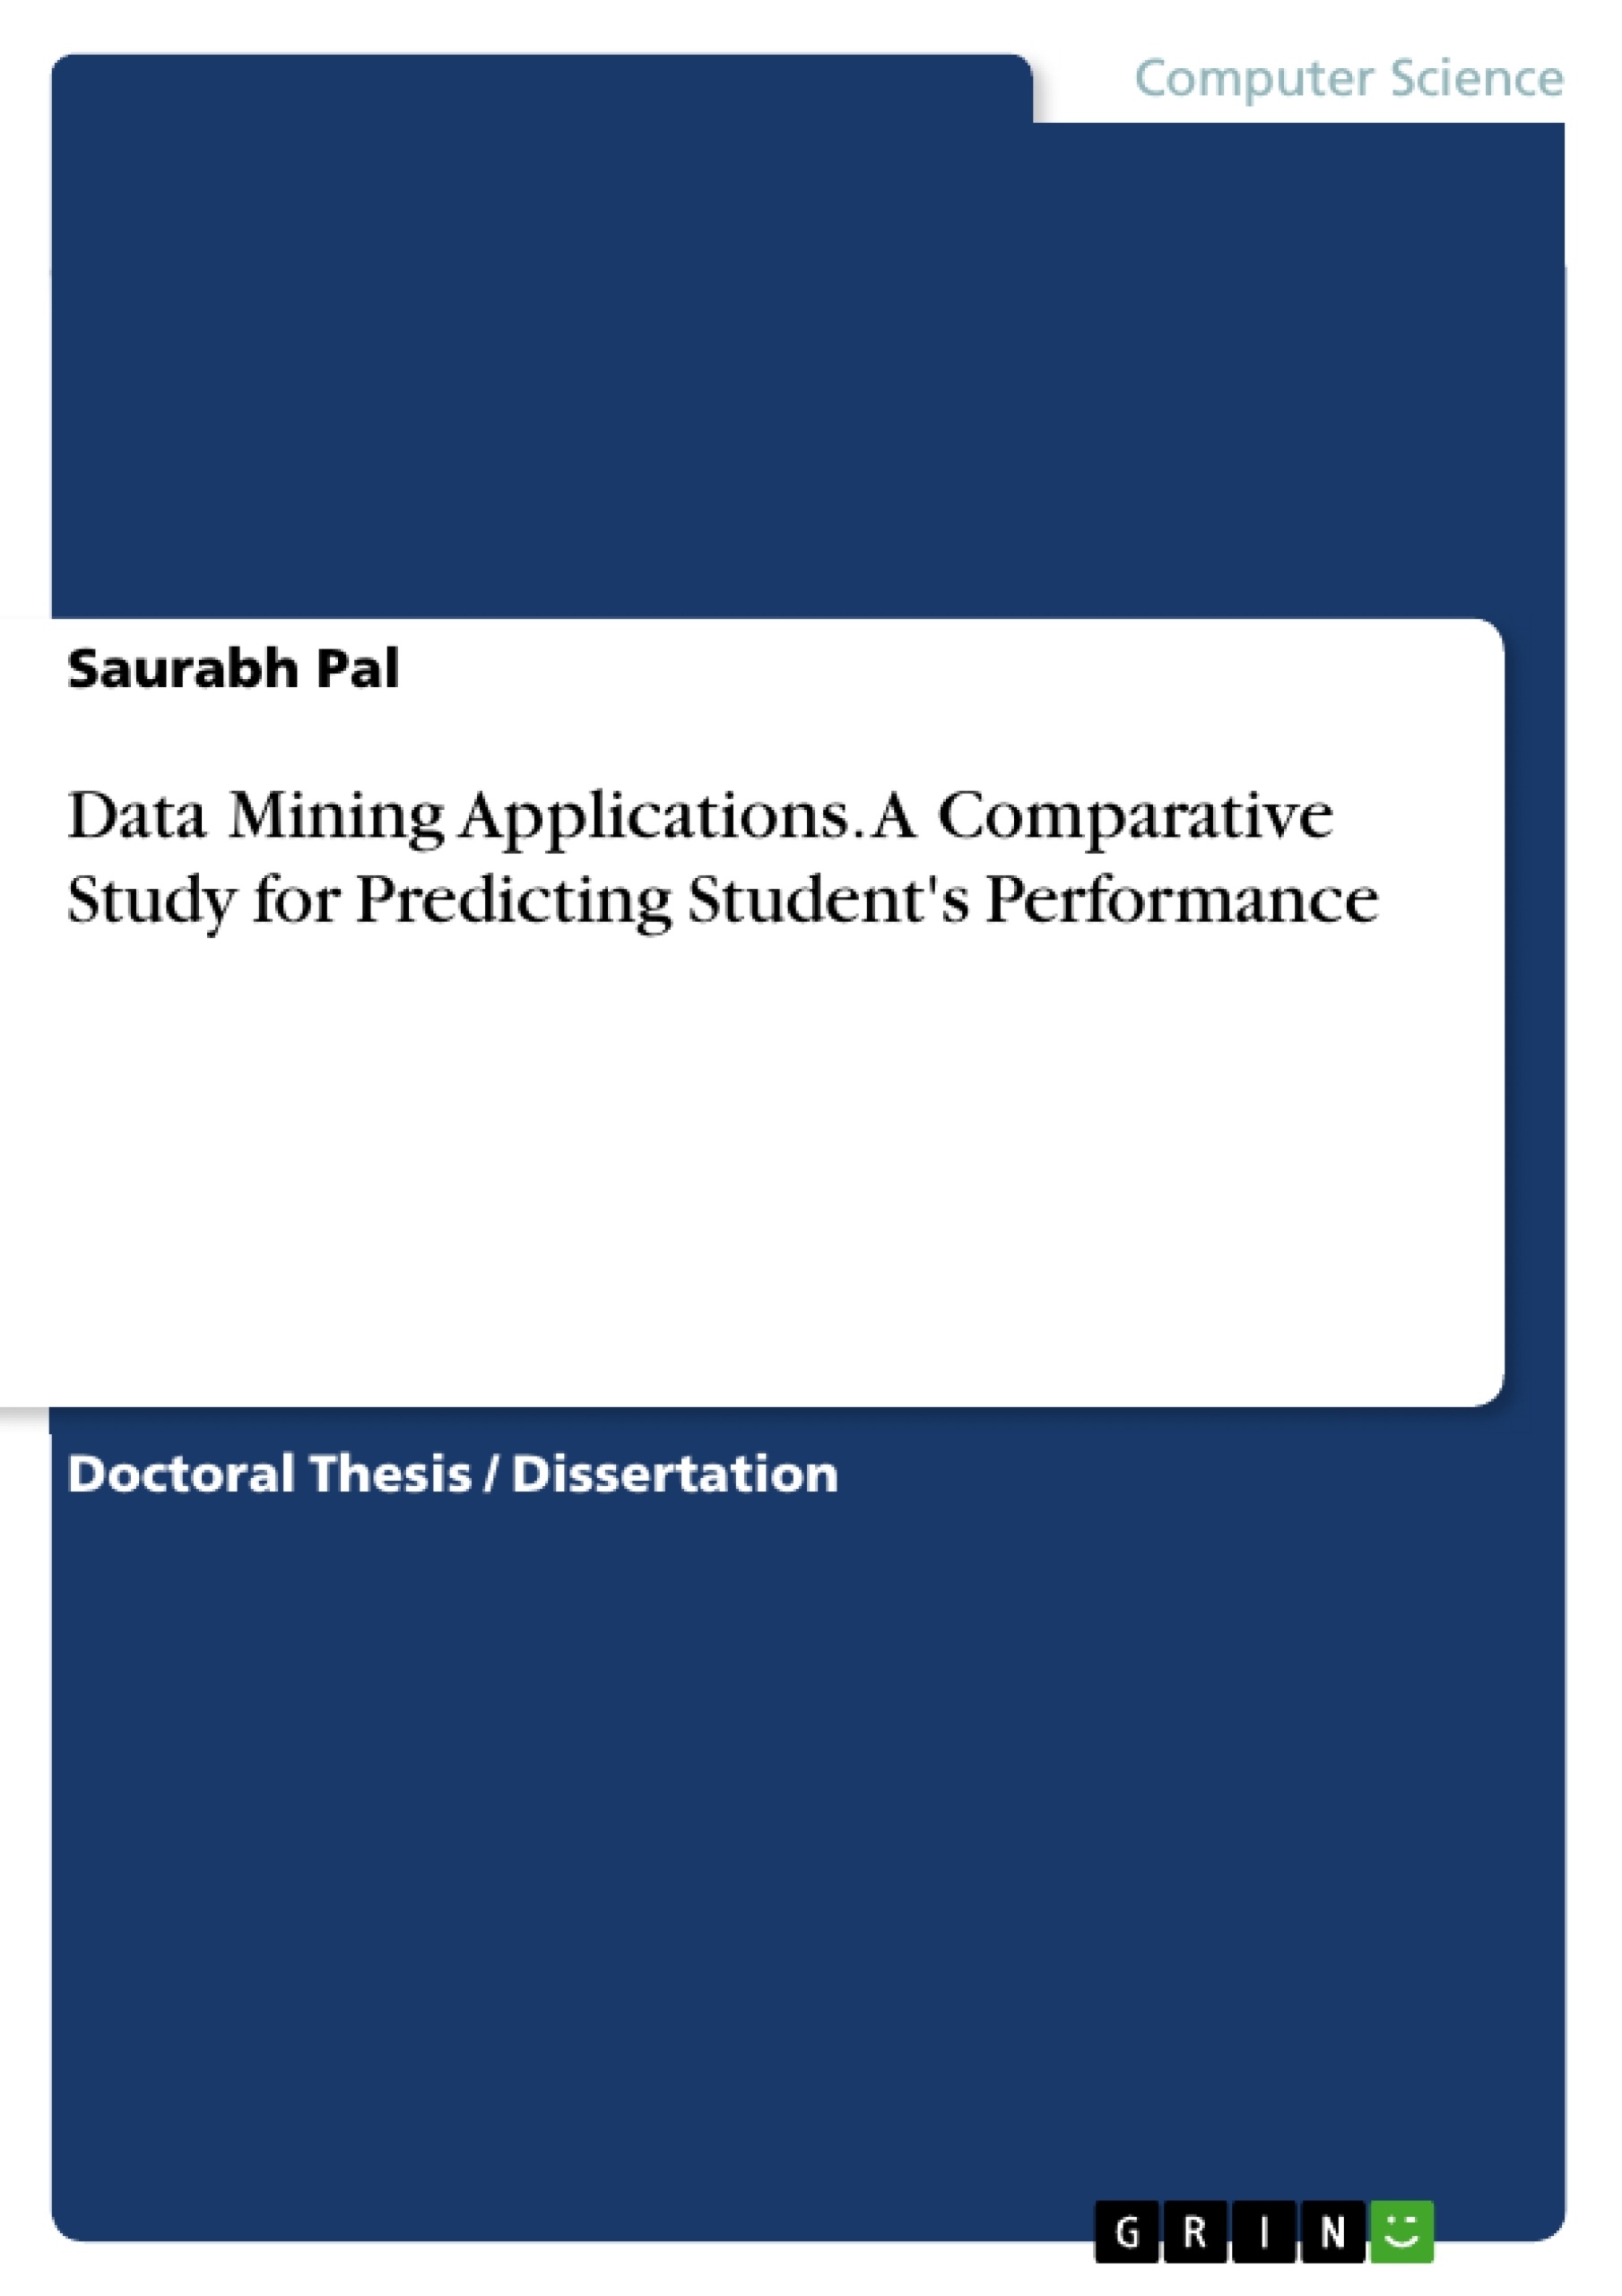 Title: Data Mining Applications. A Comparative Study for Predicting Student's Performance